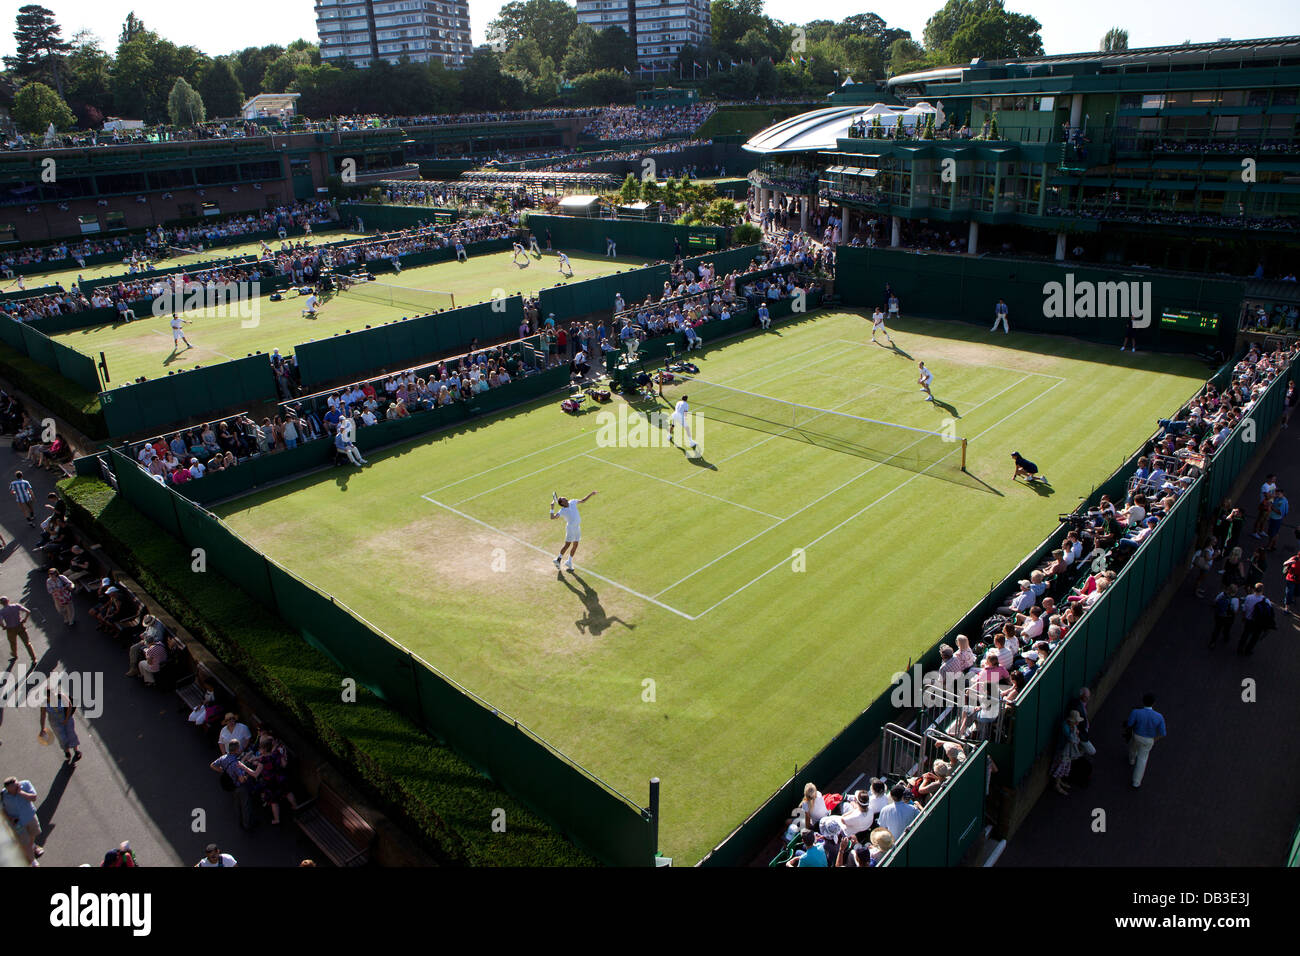 View of Courts 6, 7 and 8 from The Gallery The Championships Wimbledon 2012 Stock Photo